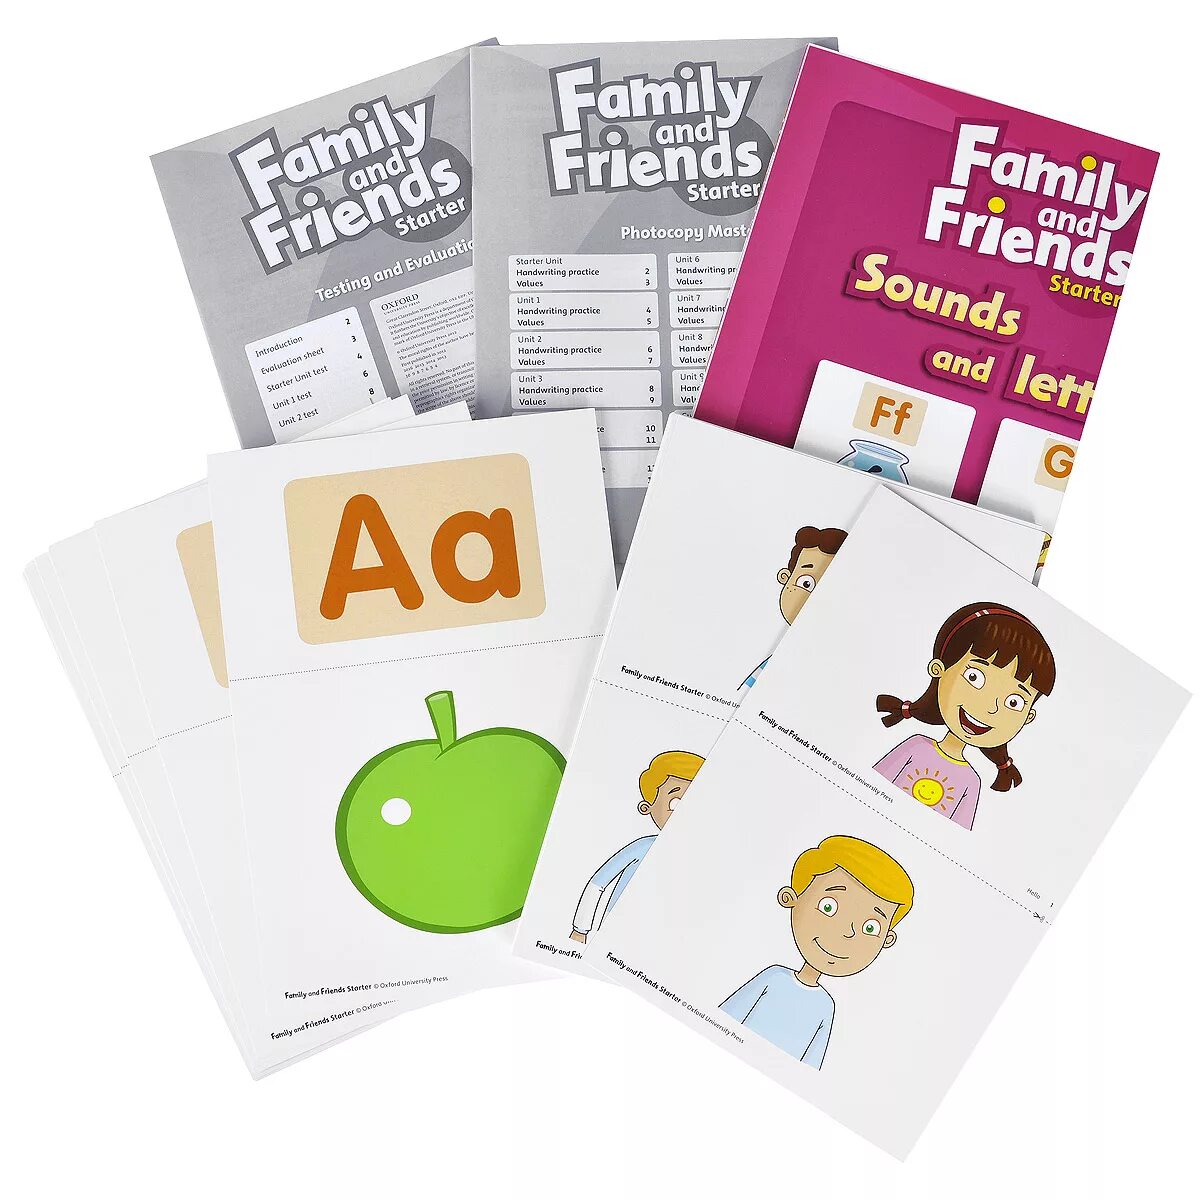 Family and friends: Starter. Фэмили френдс стартер. УМК Family and friends. Family and friends Starter карточки. Family and friends students